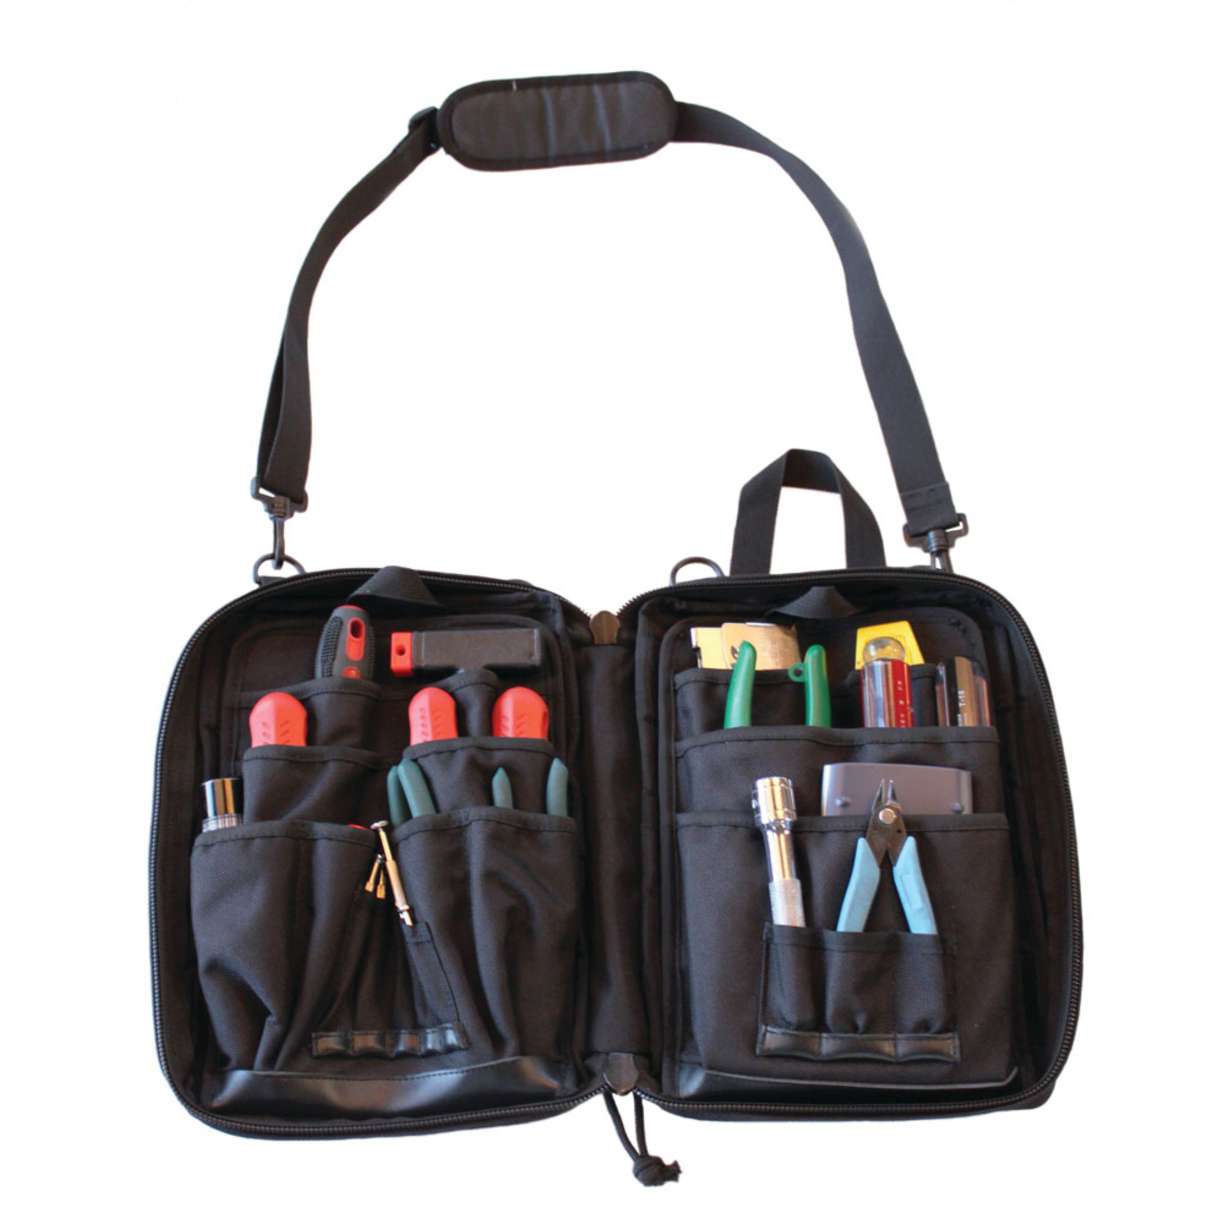 Pro-Fit Carry Systems Zippered Tech Tool Bag with Shoulder Strap